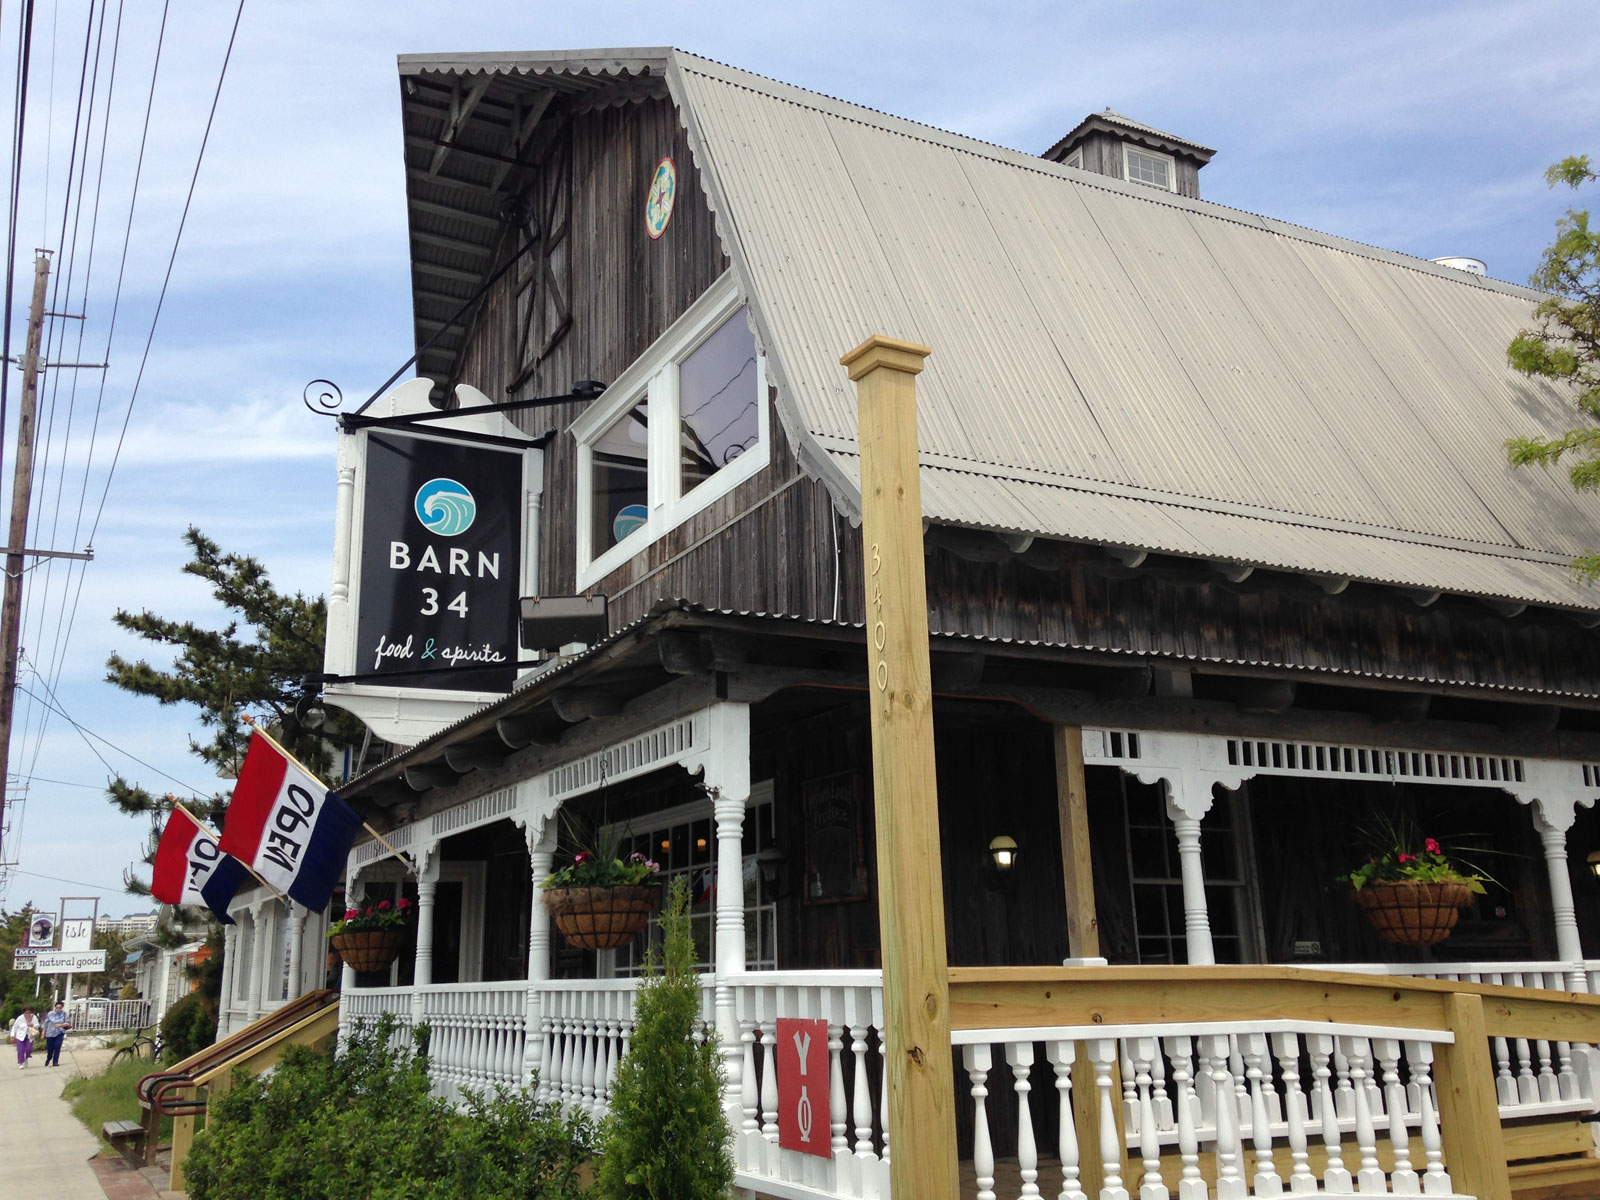 Pirate’s Den reopens in new spot as Barn 34